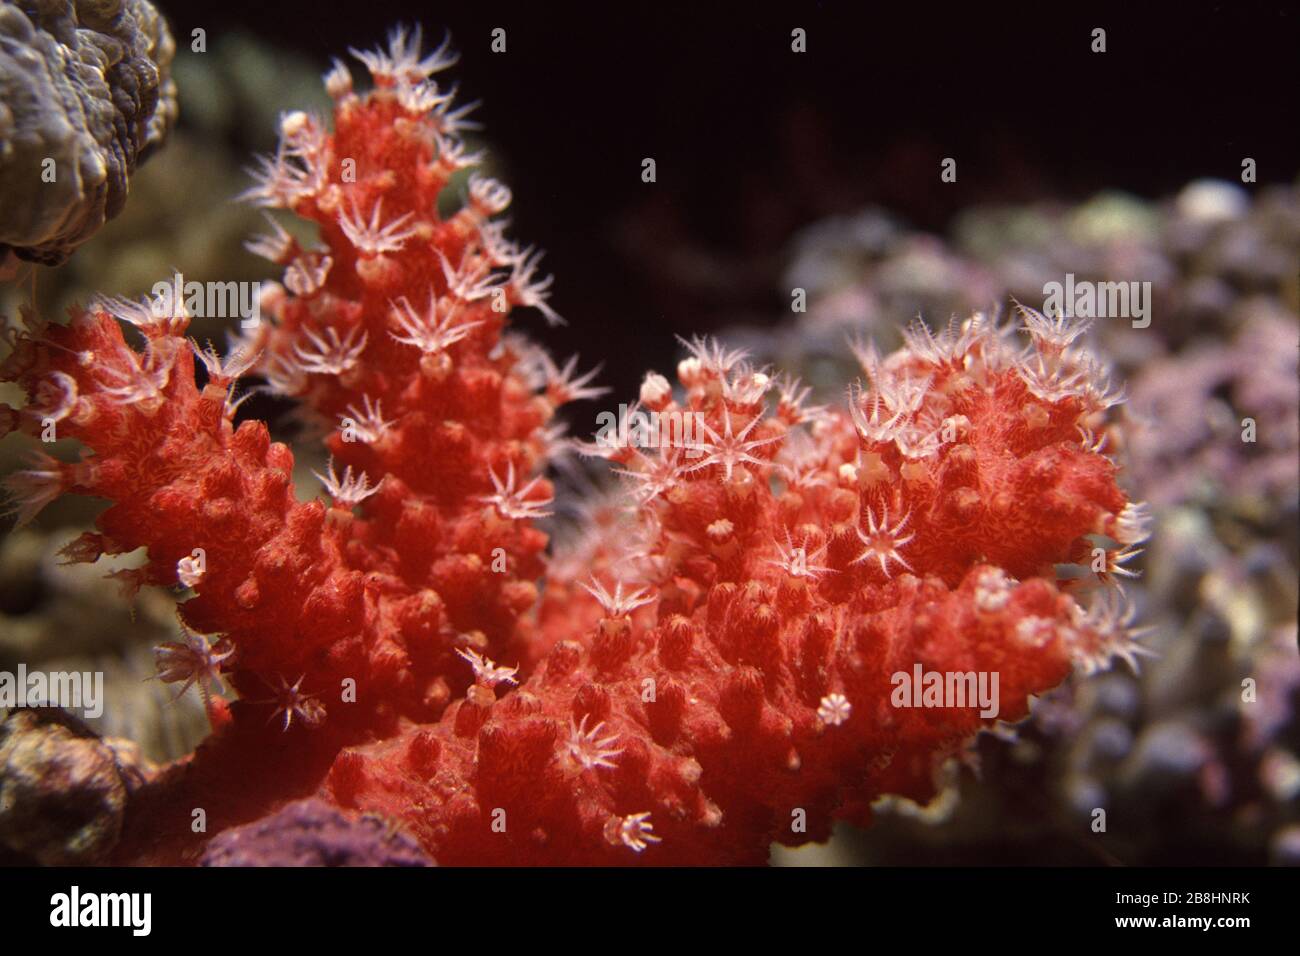 Red finger soft coral, Alcyonum sp. Stock Photo